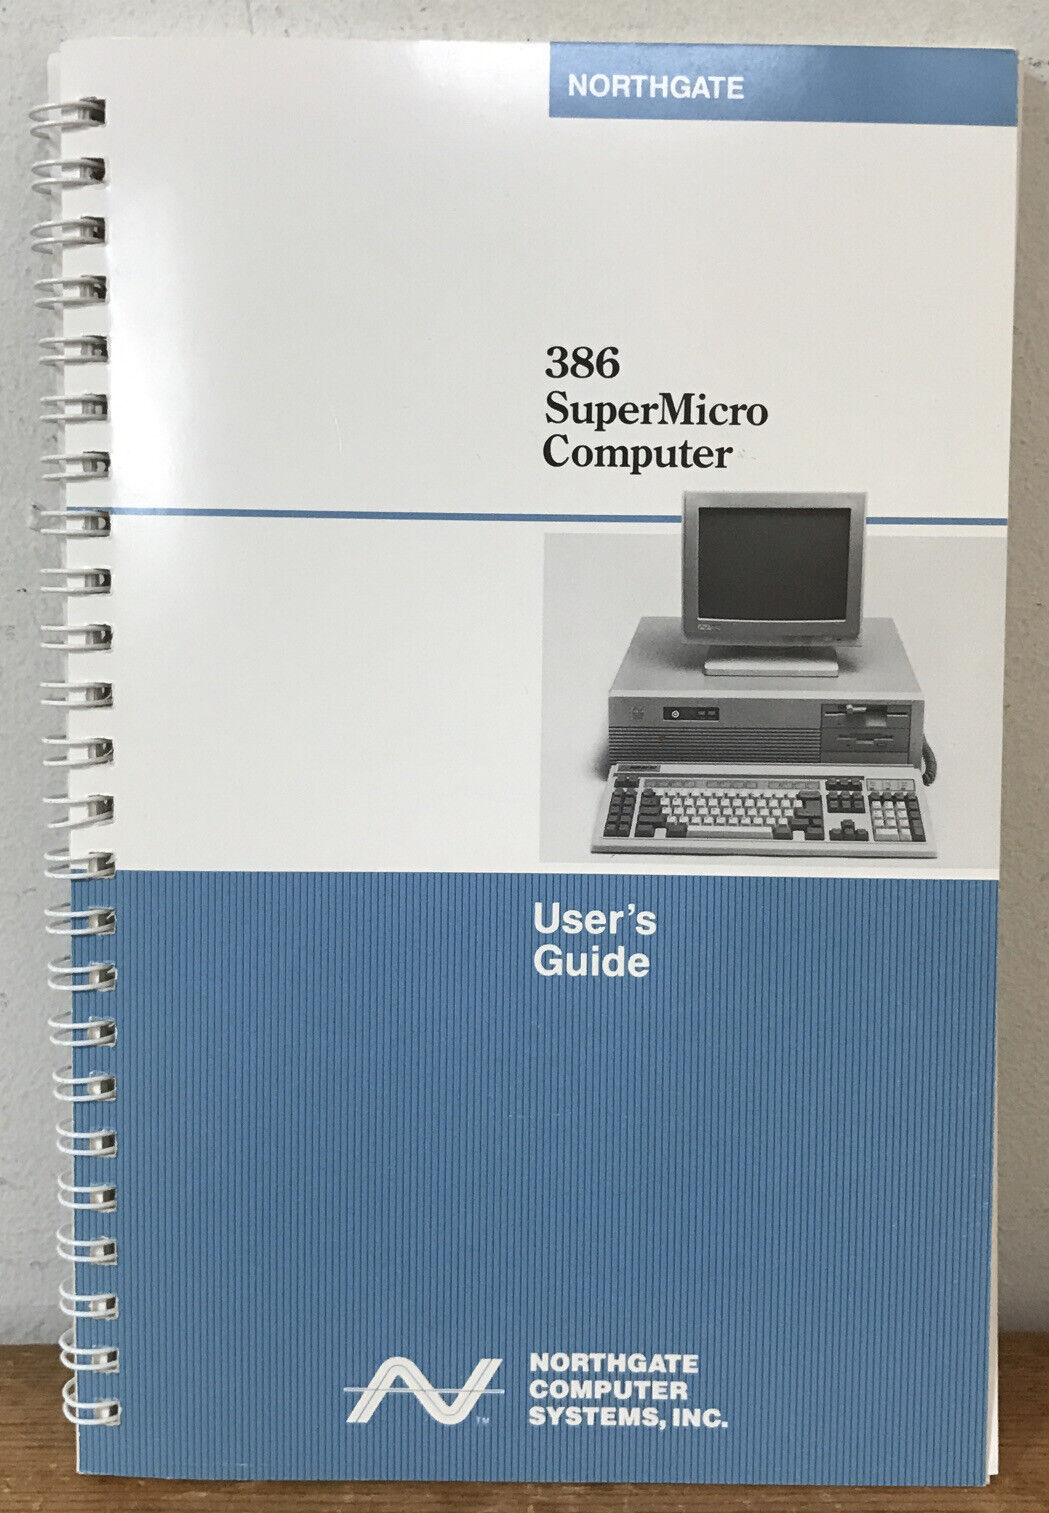 Vtg 1989 Northgate Computer Systems Inc 386 SuperMicro Computer Users Manual